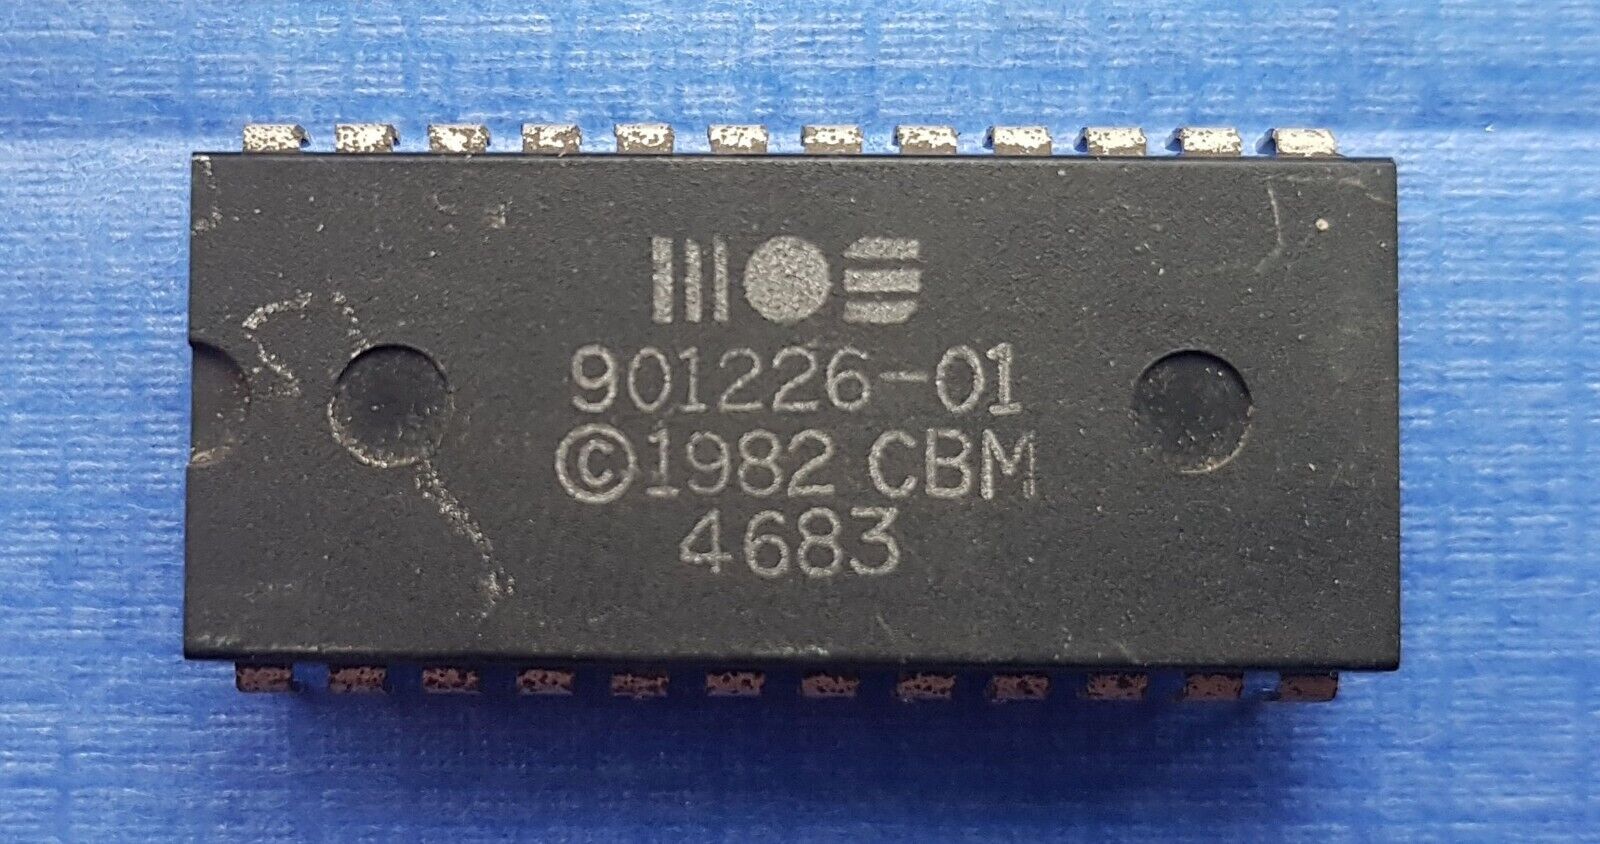 MOS 901226-01 BASIC ROM Chip IC for Commodore 64 Genuine part, working.